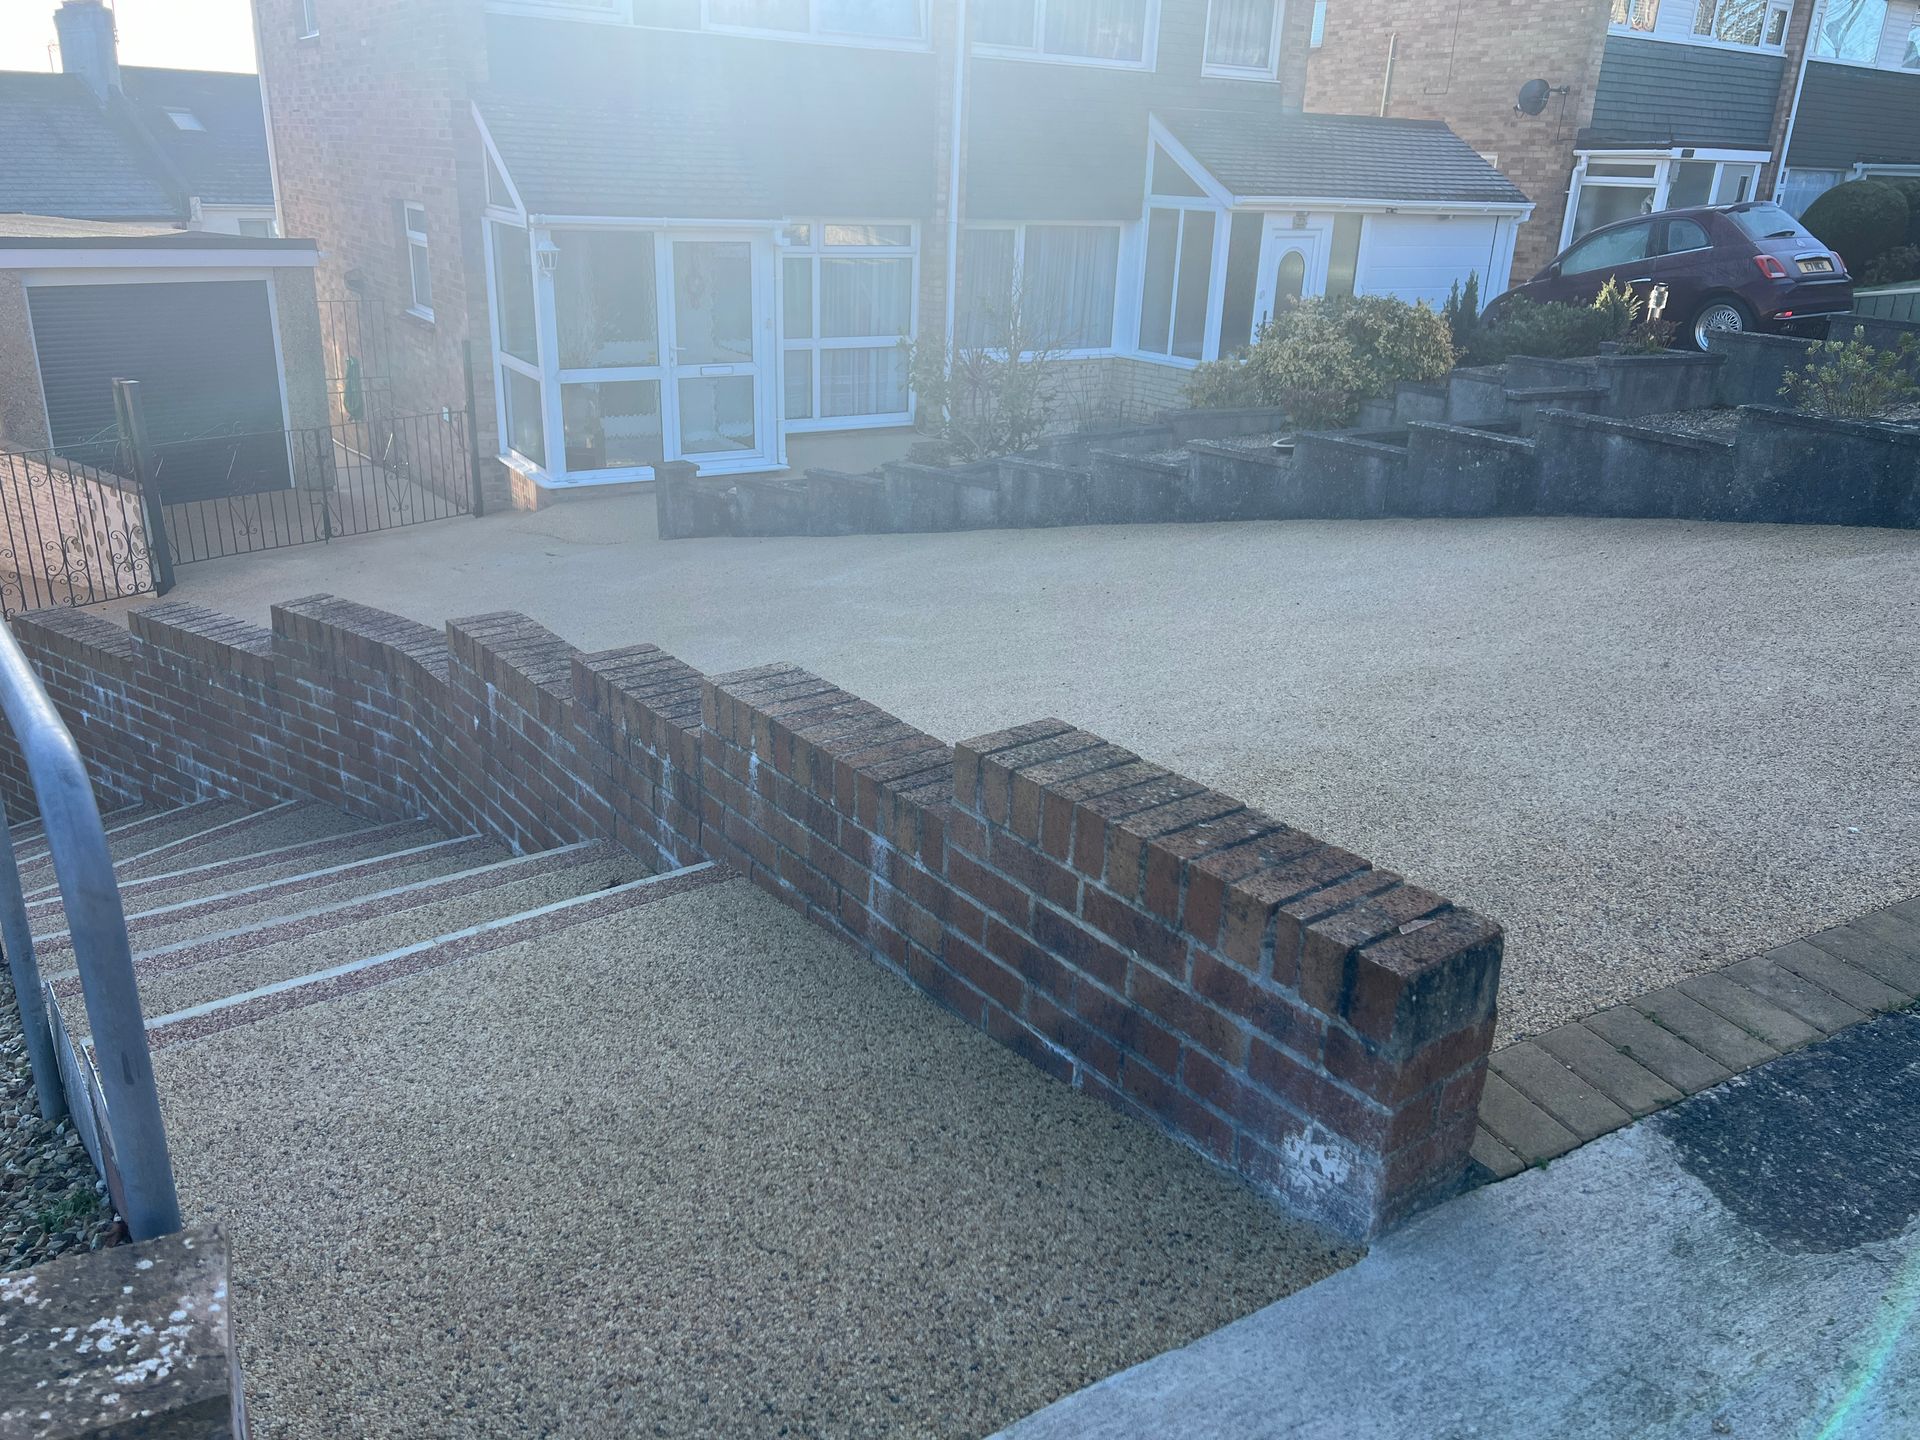 Brand-new resin driveway next to resin surfaced steps installed outside a brick house.